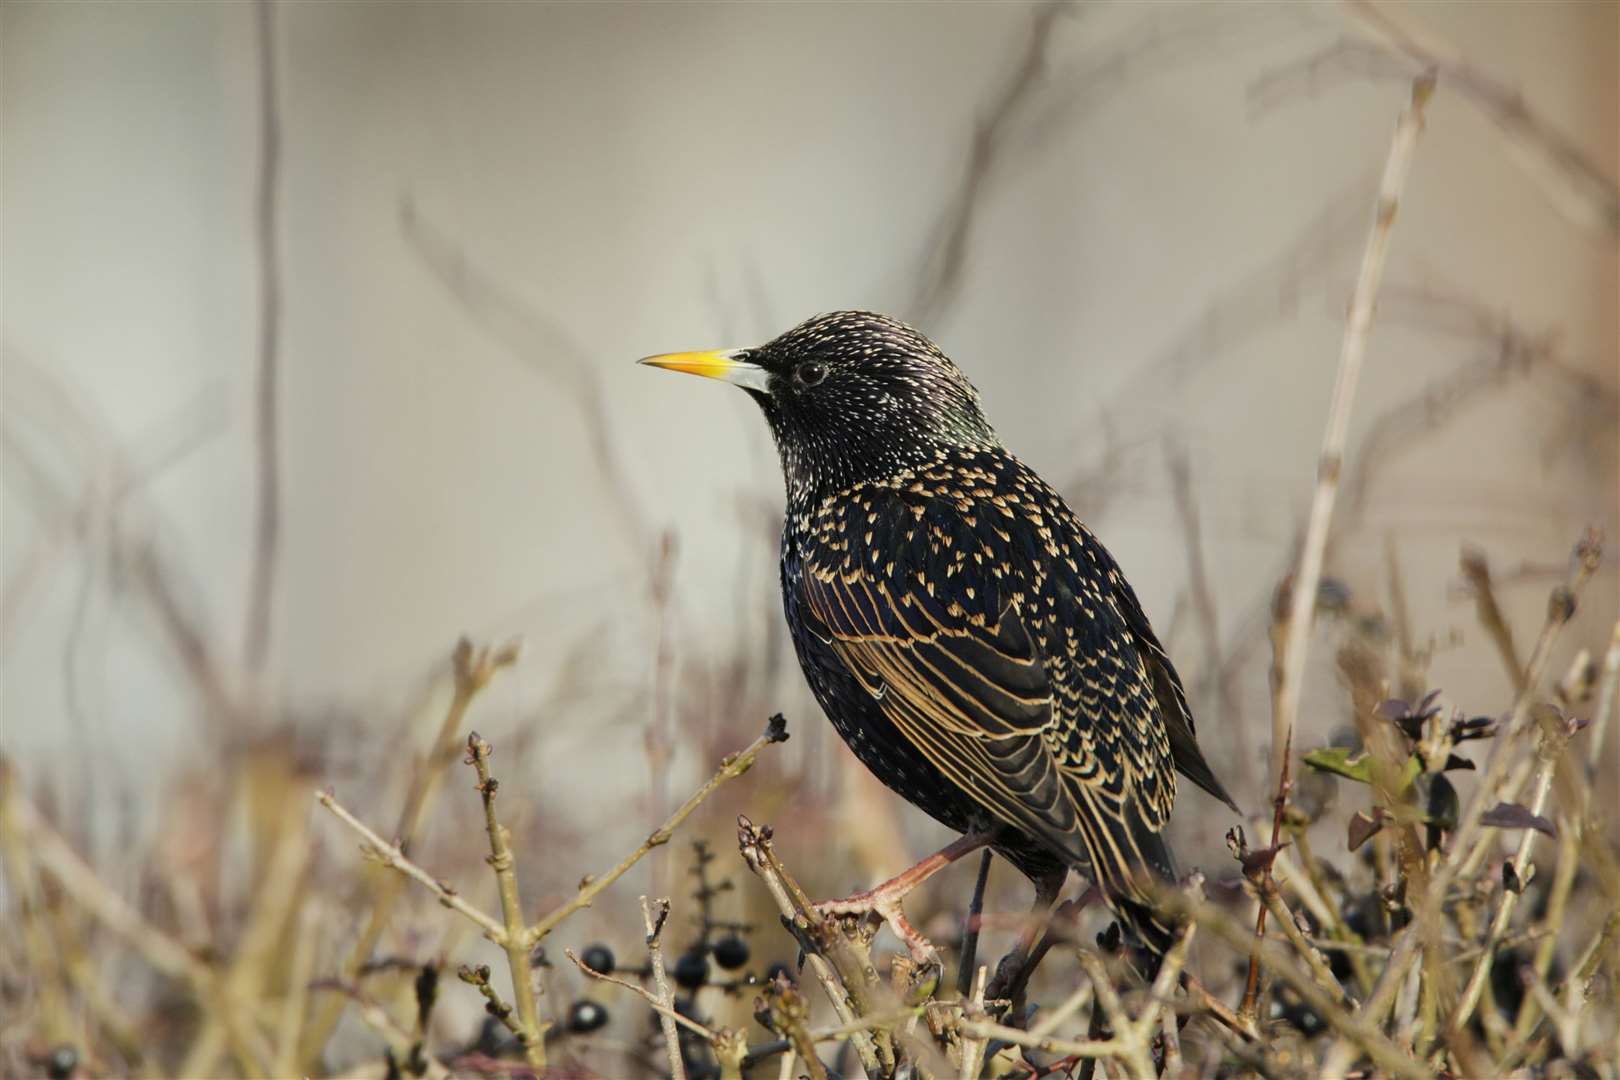 Starlings are often thought to return to the same place when nesting.